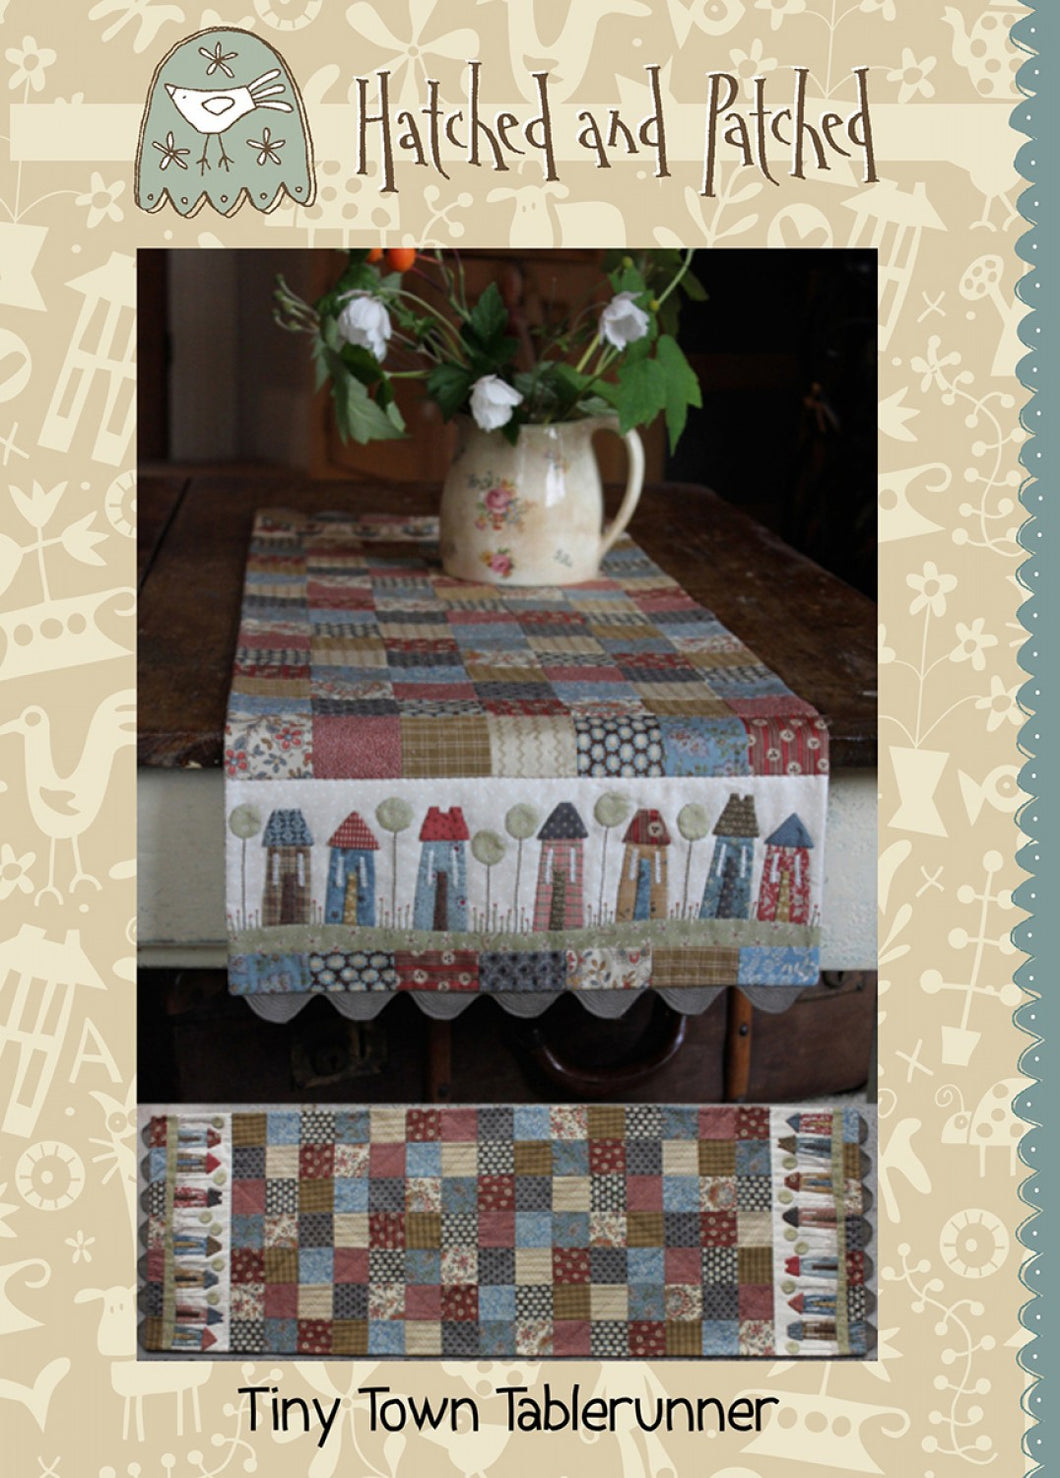 HATCHED AND PATCHED -  TINY TOWN TABLE RUNNER - Quilt pattern